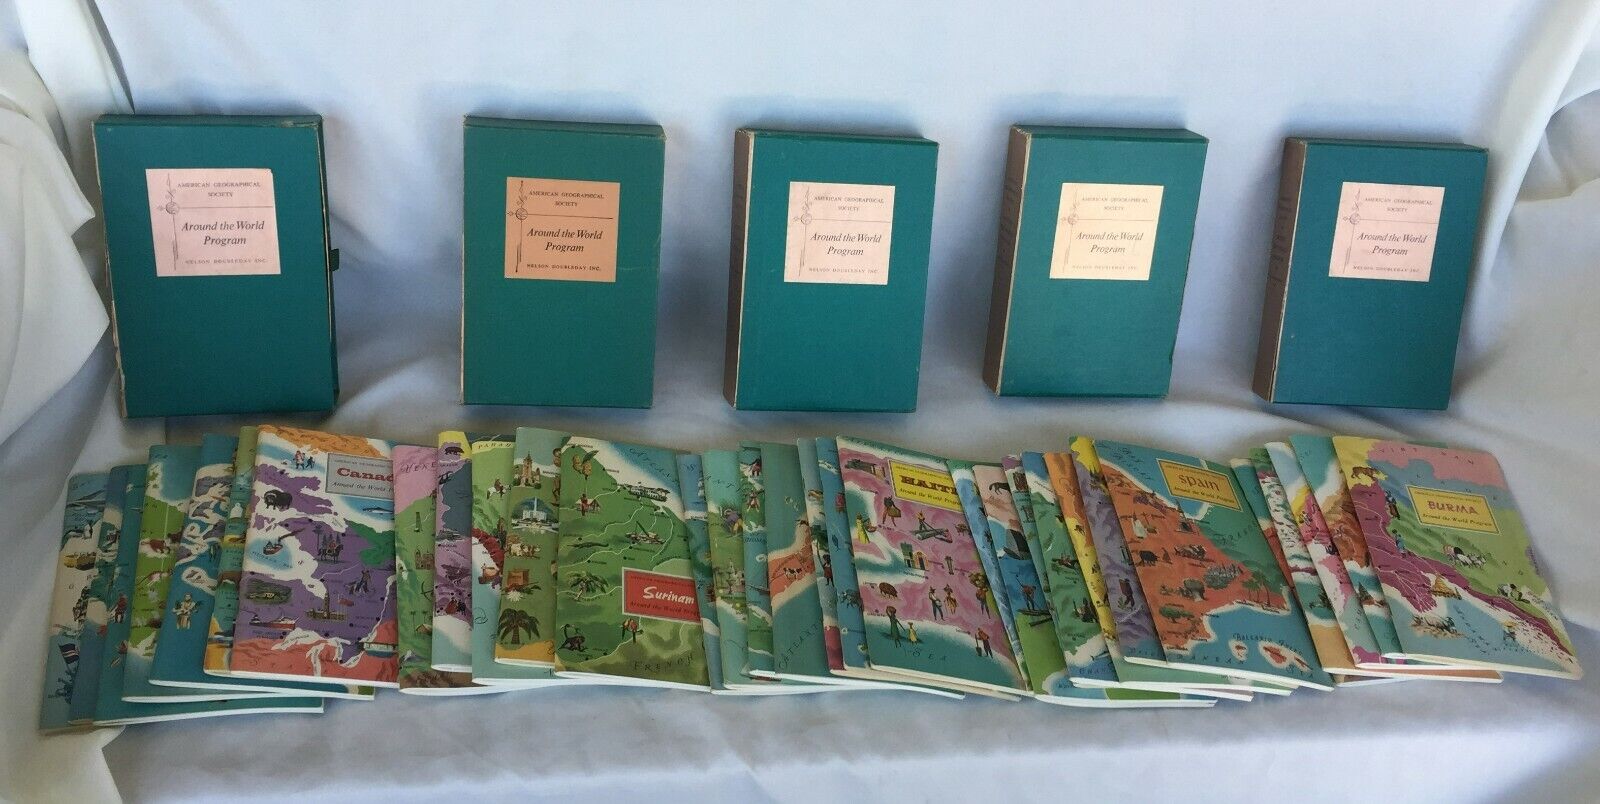 AROUND THE WORLD PROGRAM American Geographical Society books set of 31  1950/60s